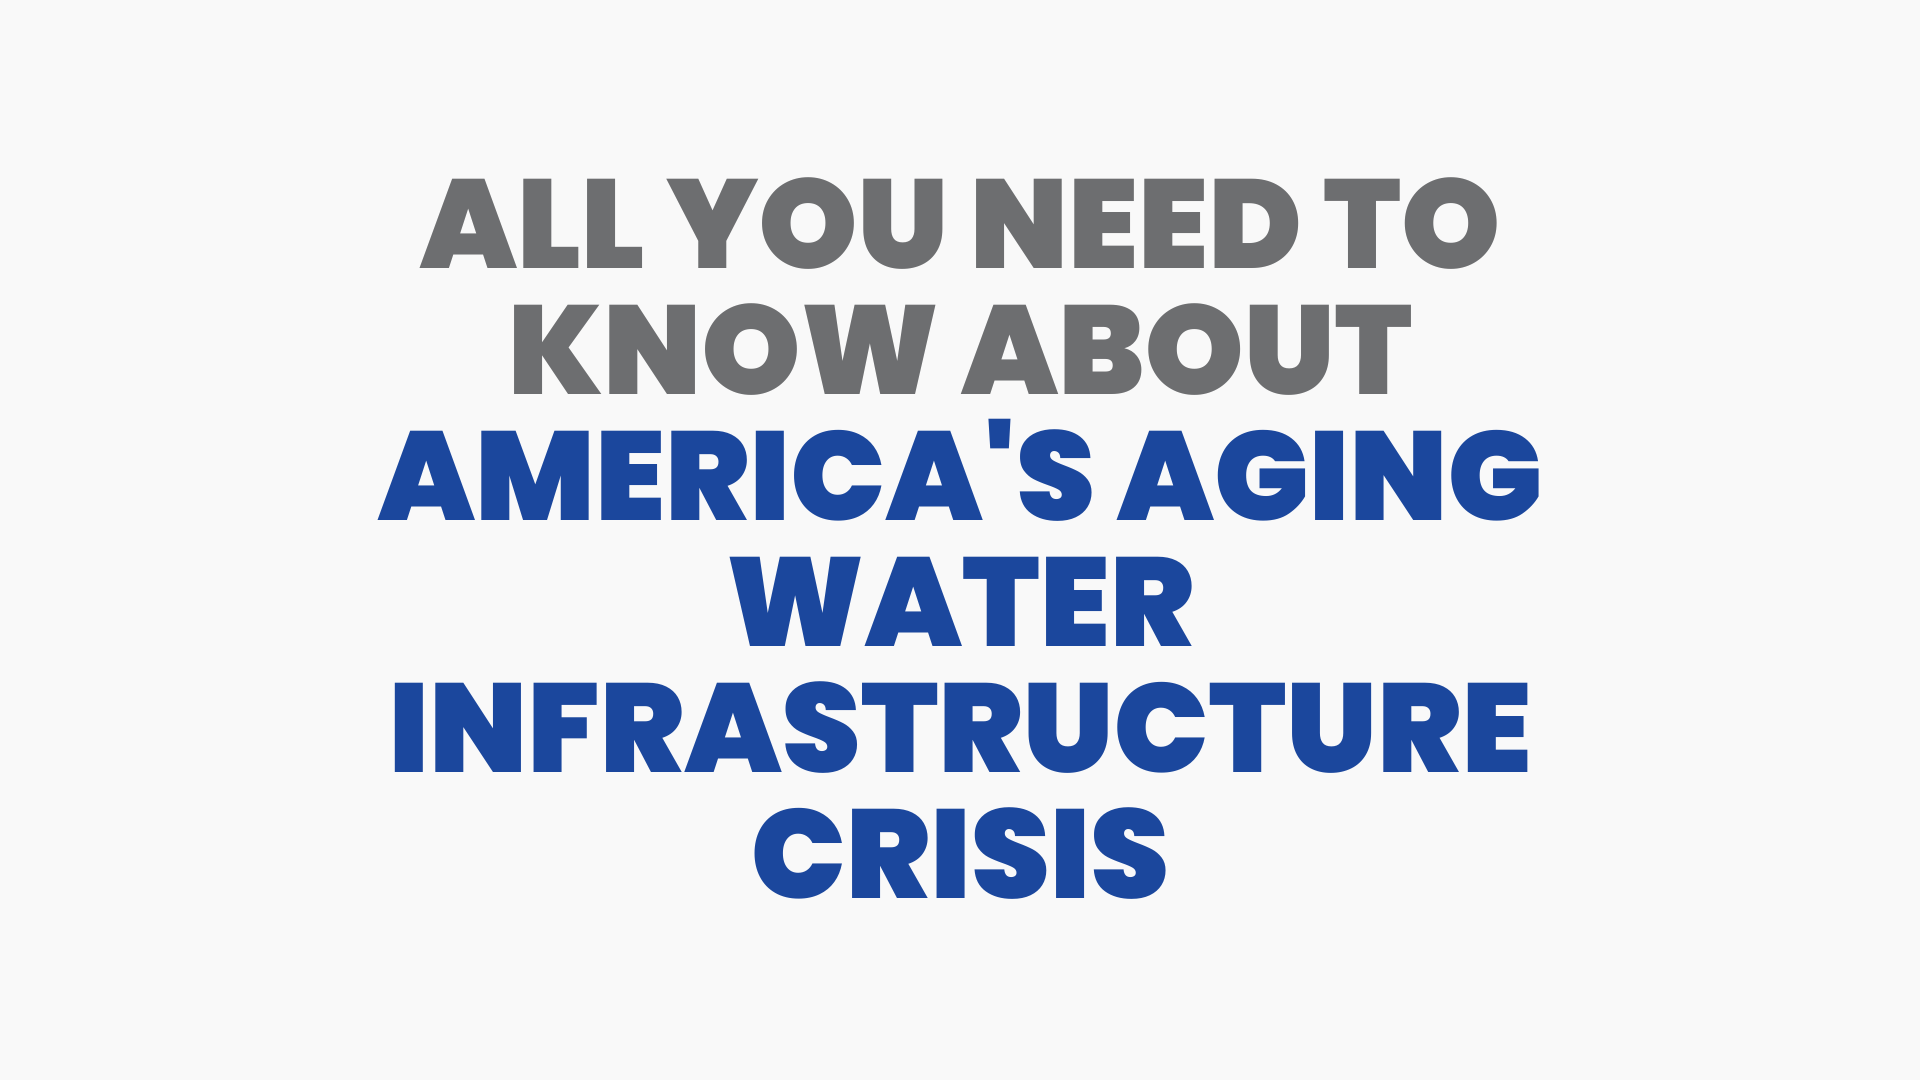 All You Need to Know About America's Aging Water Infrastructure Crisis